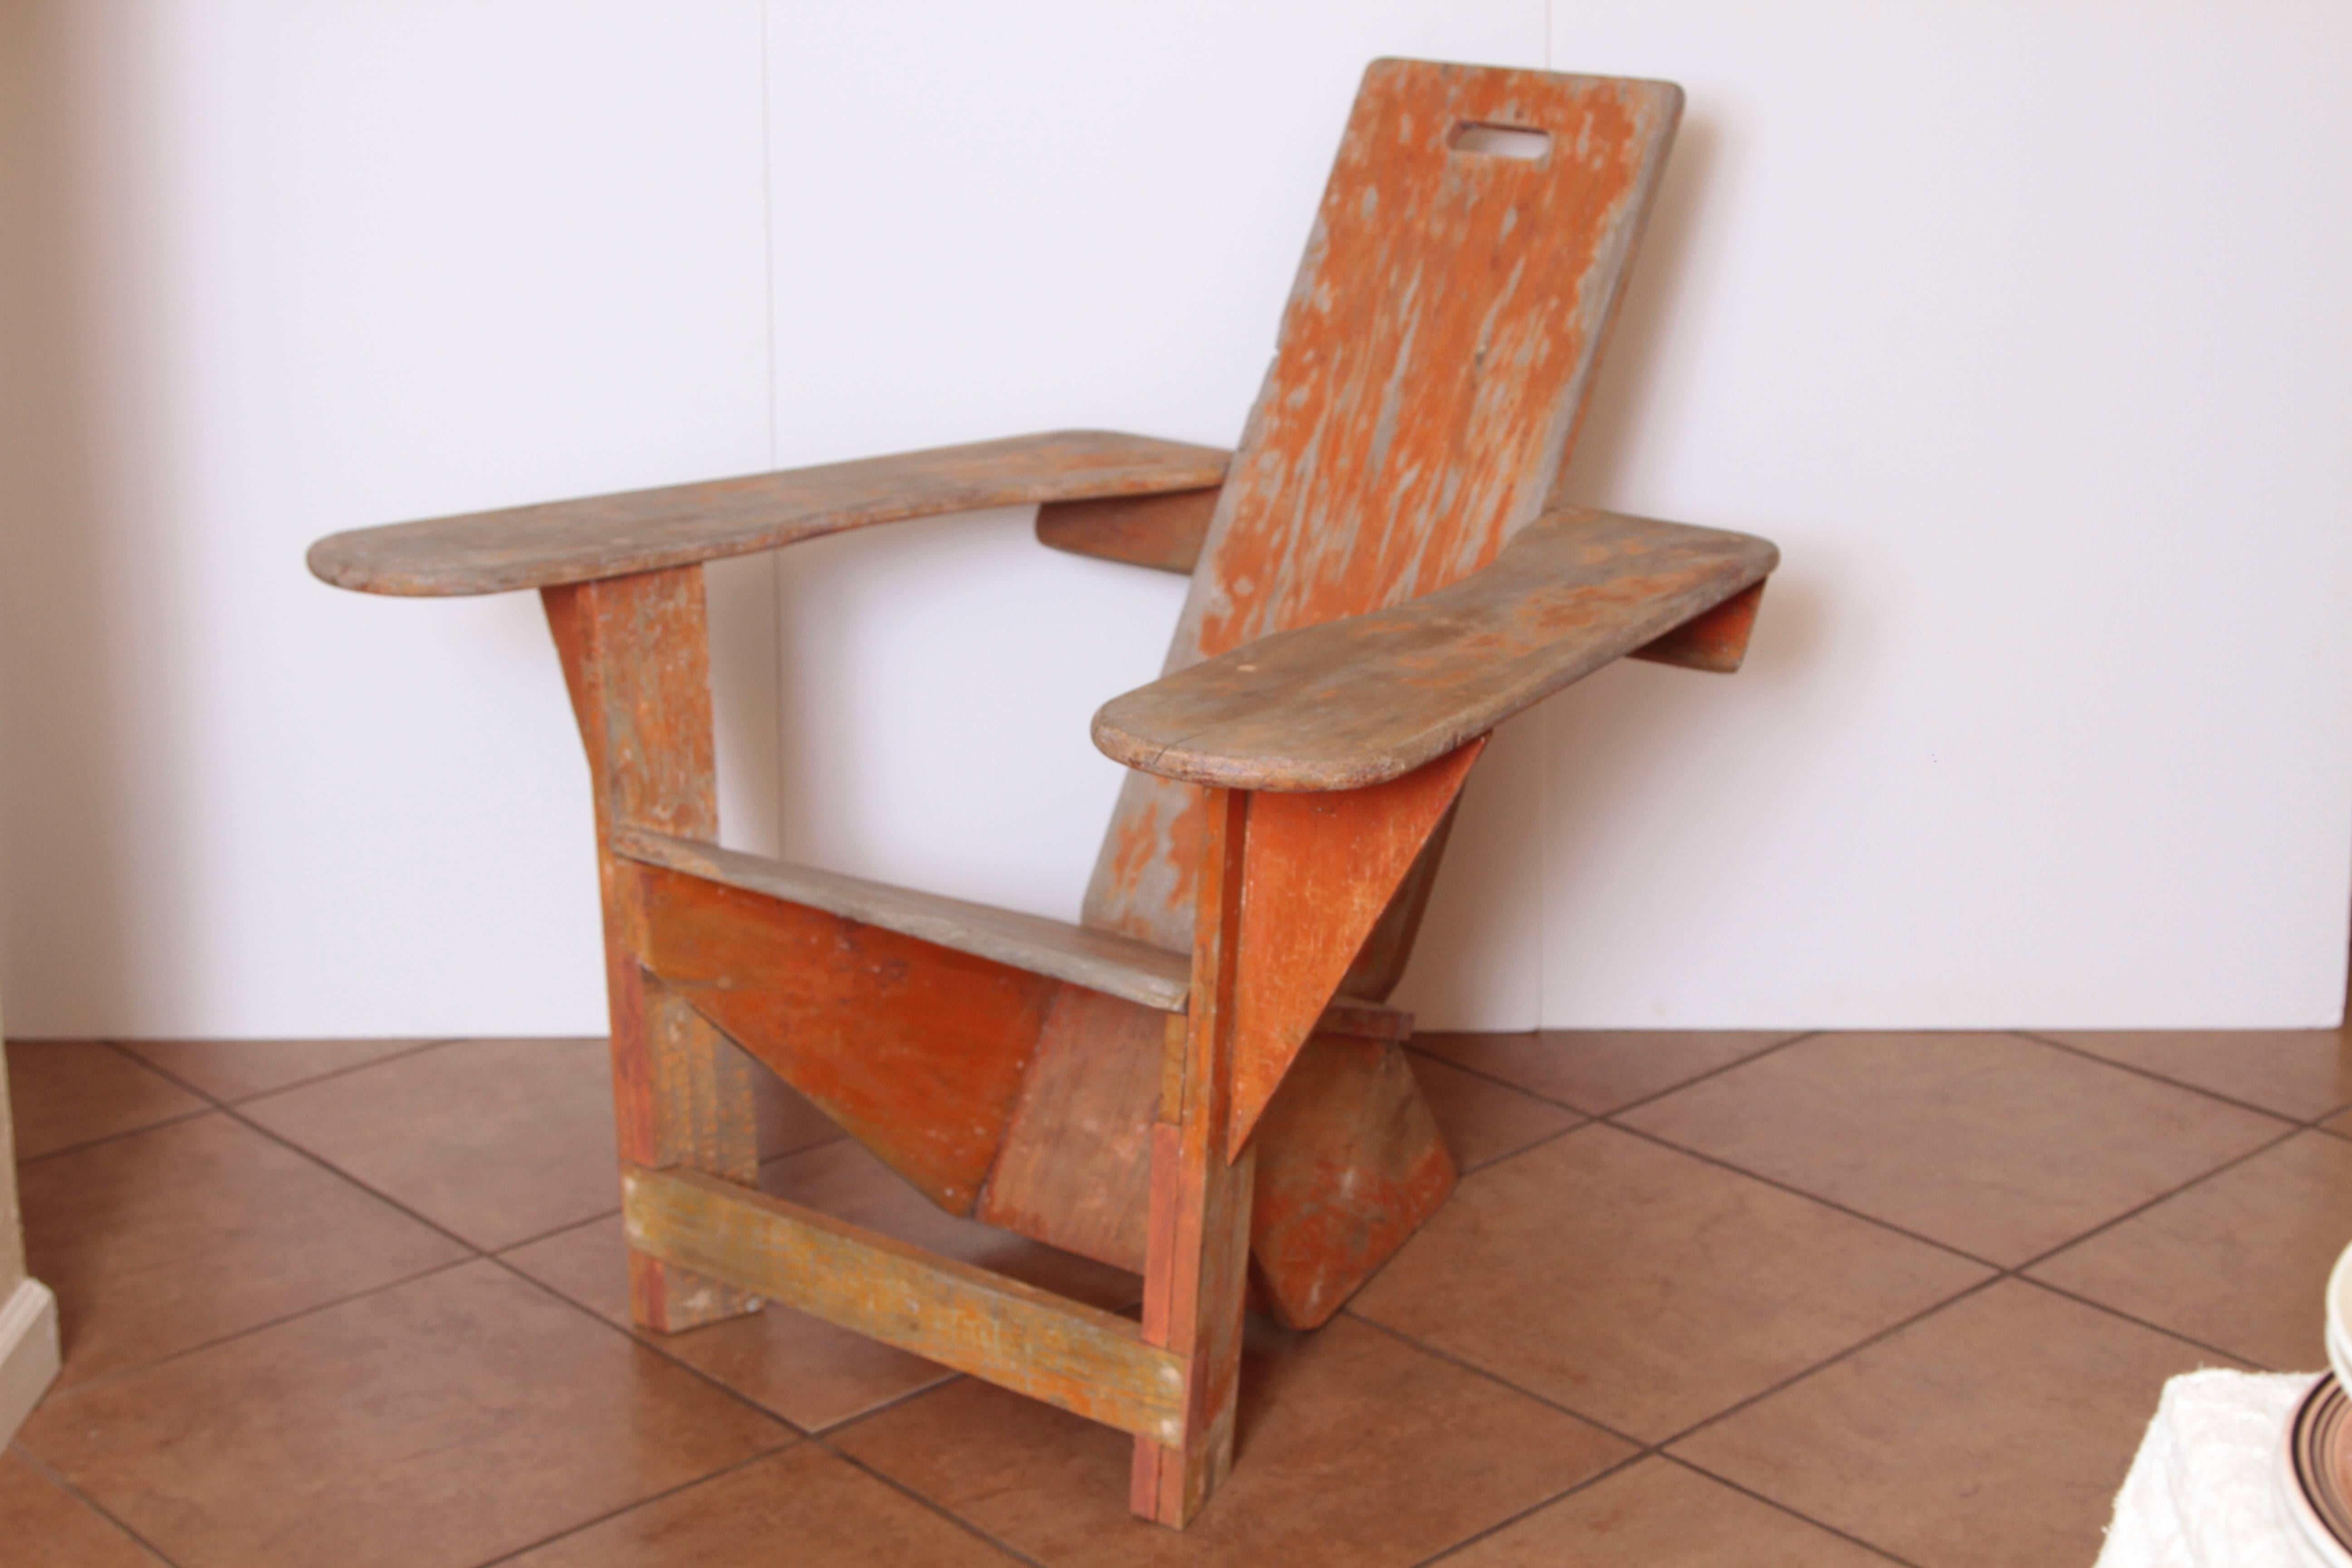 Constructivist Westport Adirondack Lounge Chair, Early American Modernist Form   PRICE REDUCED from $14,400
Precursor to American Modernist Craft Design.  Pre Art Deco.   Pre mid-century.  Cubist, Cubism  
Large - scale and surprisingly